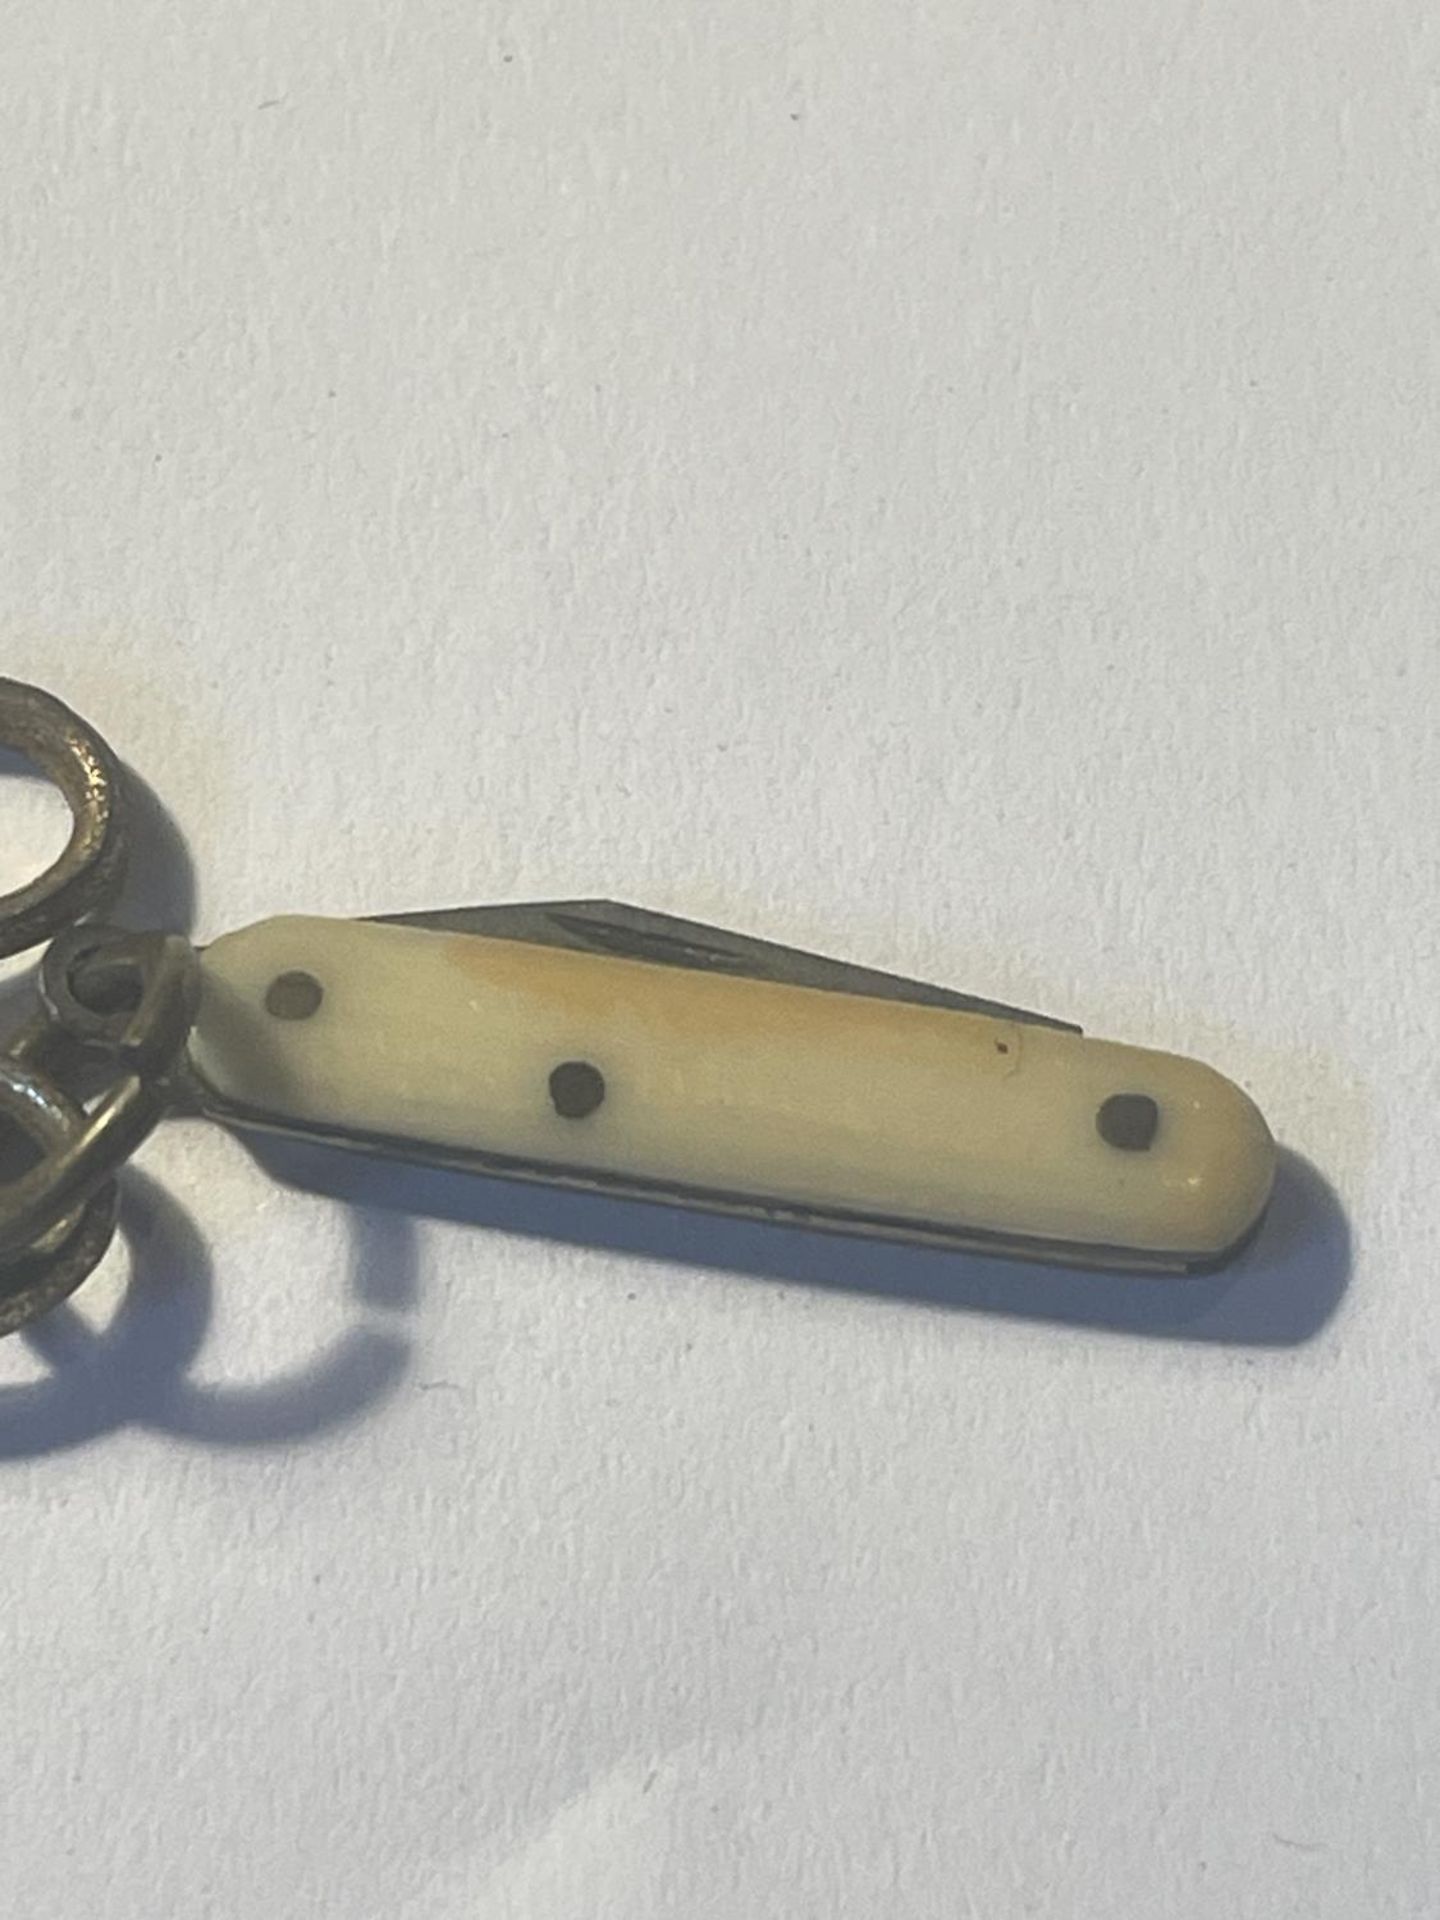 AN ANTIQUE PAIR OF MINIATURE SCISSORS IN A STORK DESIGN AND PEN KNIFE WITH A BROWN CASE LABELLED - Bild 3 aus 4